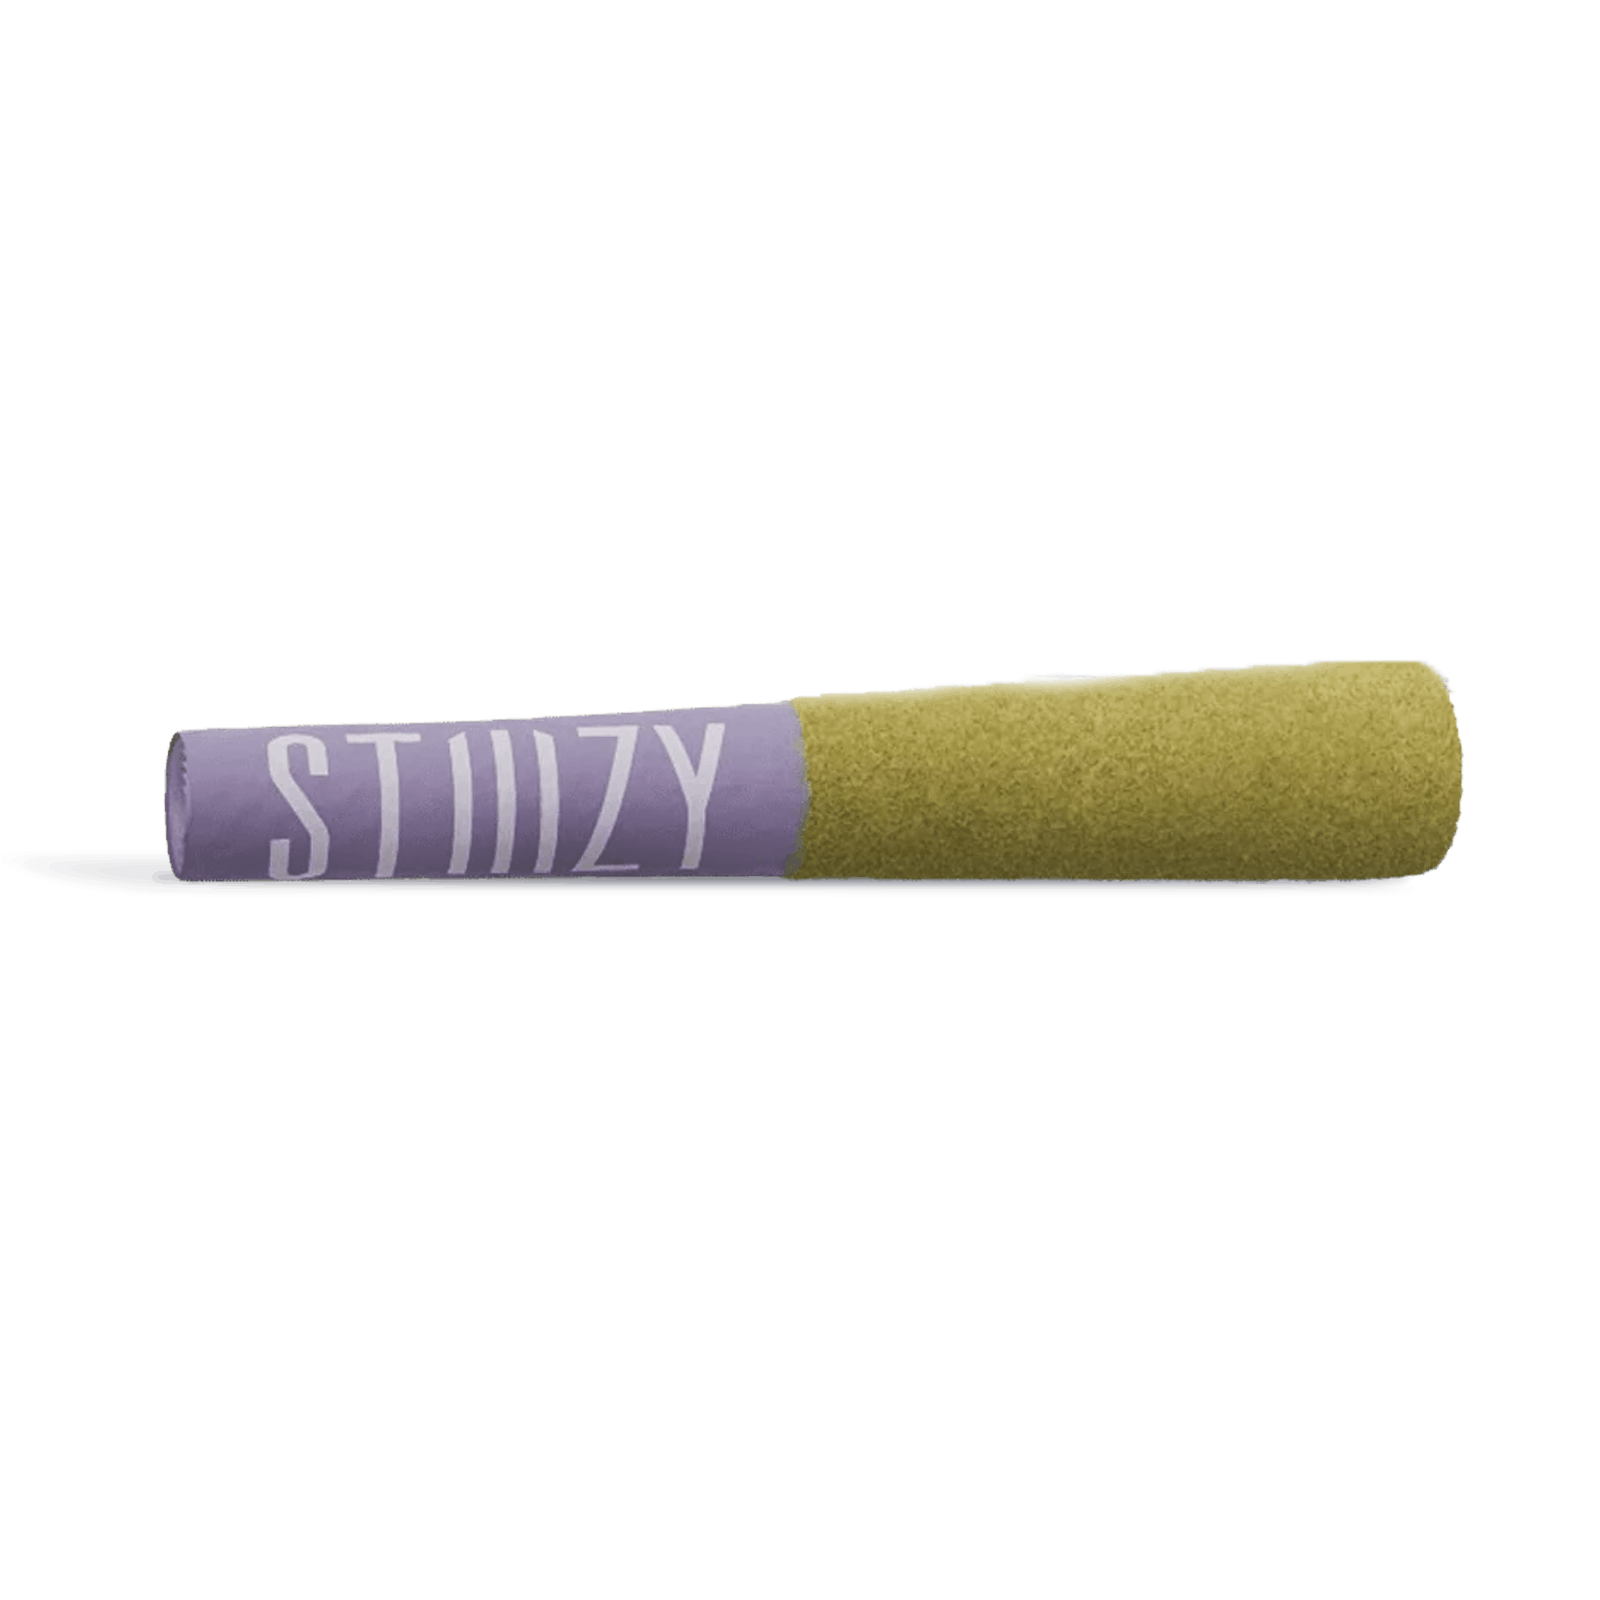 King Louie XIII Pre-Roll Joint, Premium THC Pre-Roll